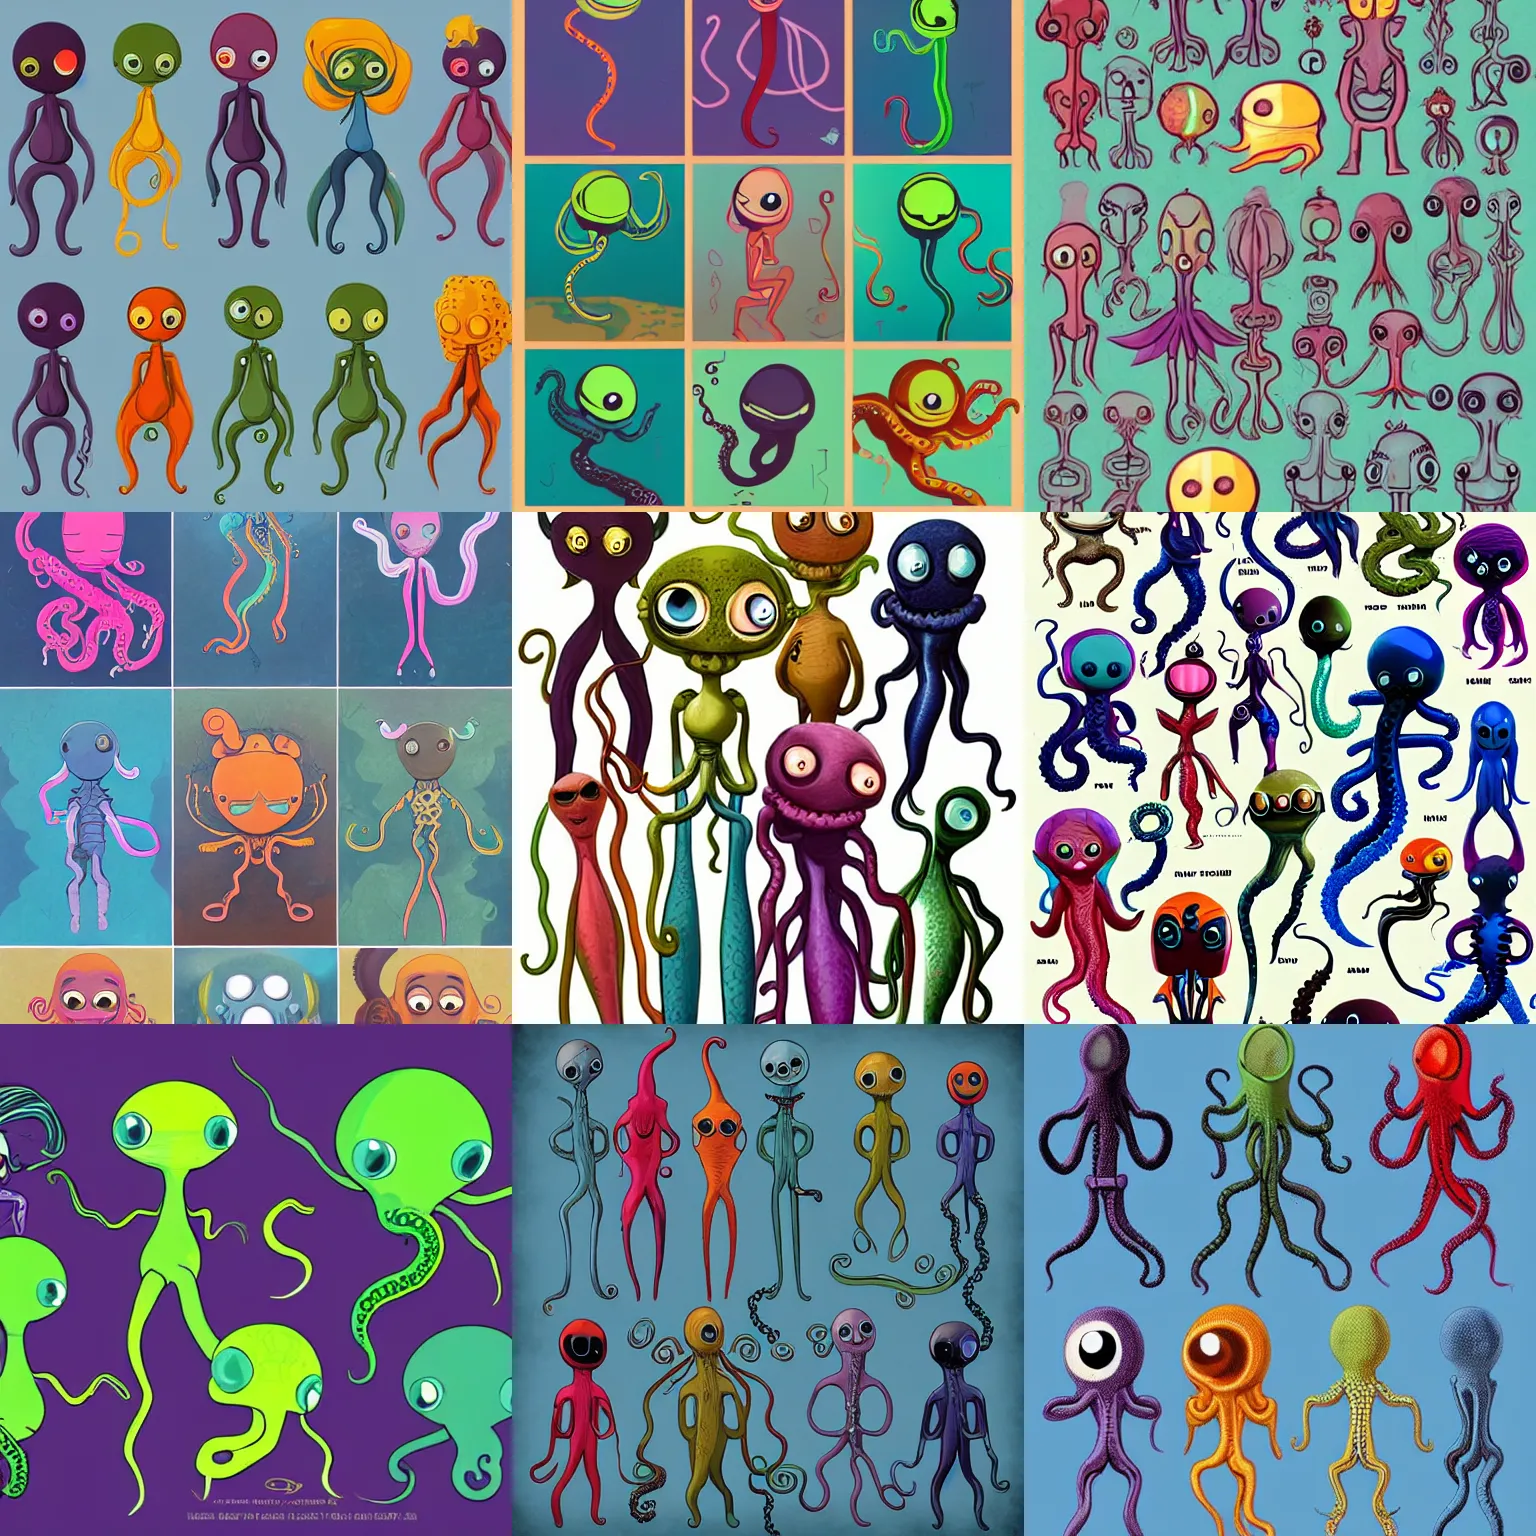 Prompt: vintage colorful friend shaped little aliens with big black alien eyes with webbed tentacle arms and skinny thin human legs inspired by Ursala from Disneys the little mermaid as playable characters design sheets for the newest psychonauts video game made by double fine done by tim shafer that focuses on an ocean setting with help from the artists of odd world inhabitants inc and Lauren faust from her work on dc superhero girls and lead artist Andy Suriano from rise of the teenage mutant ninja turtles on nickelodeon using artistic cues for the game fret nice